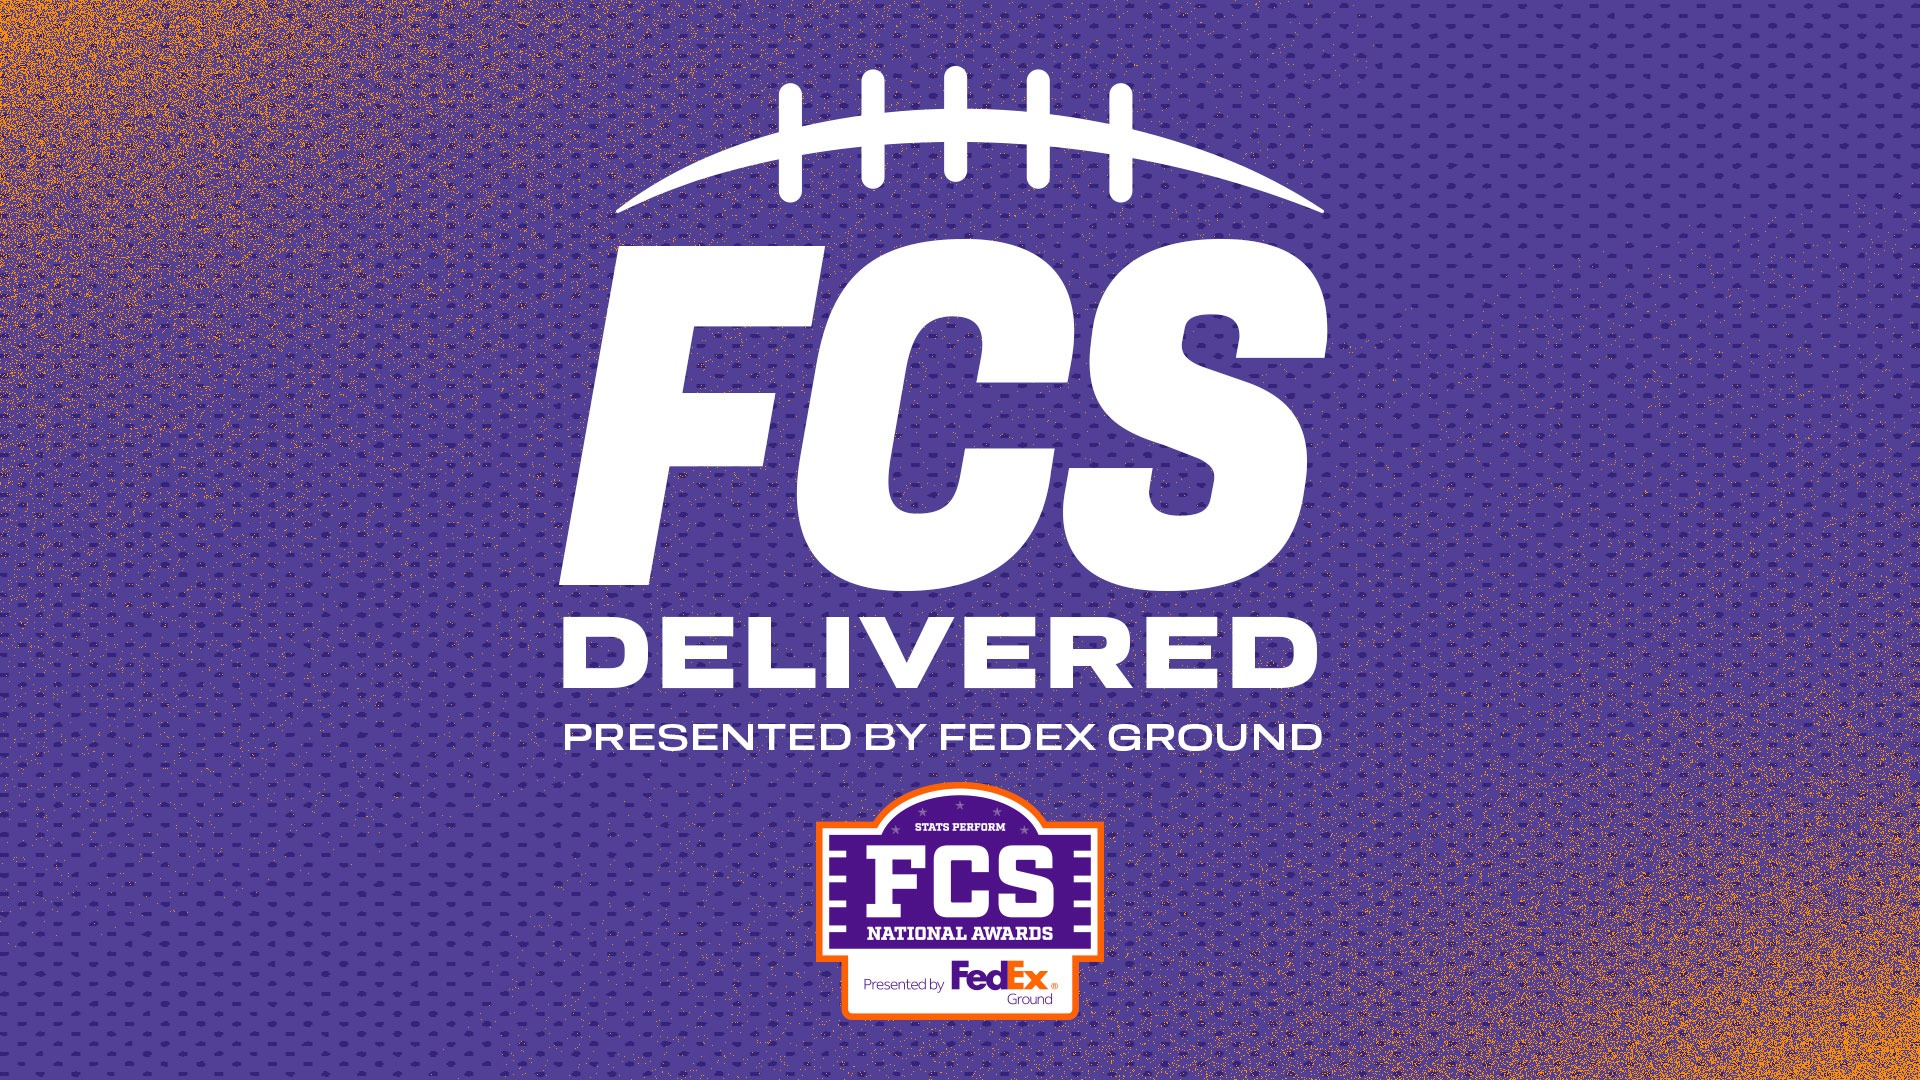 Episode One: New Beginnings with FCS Delivered